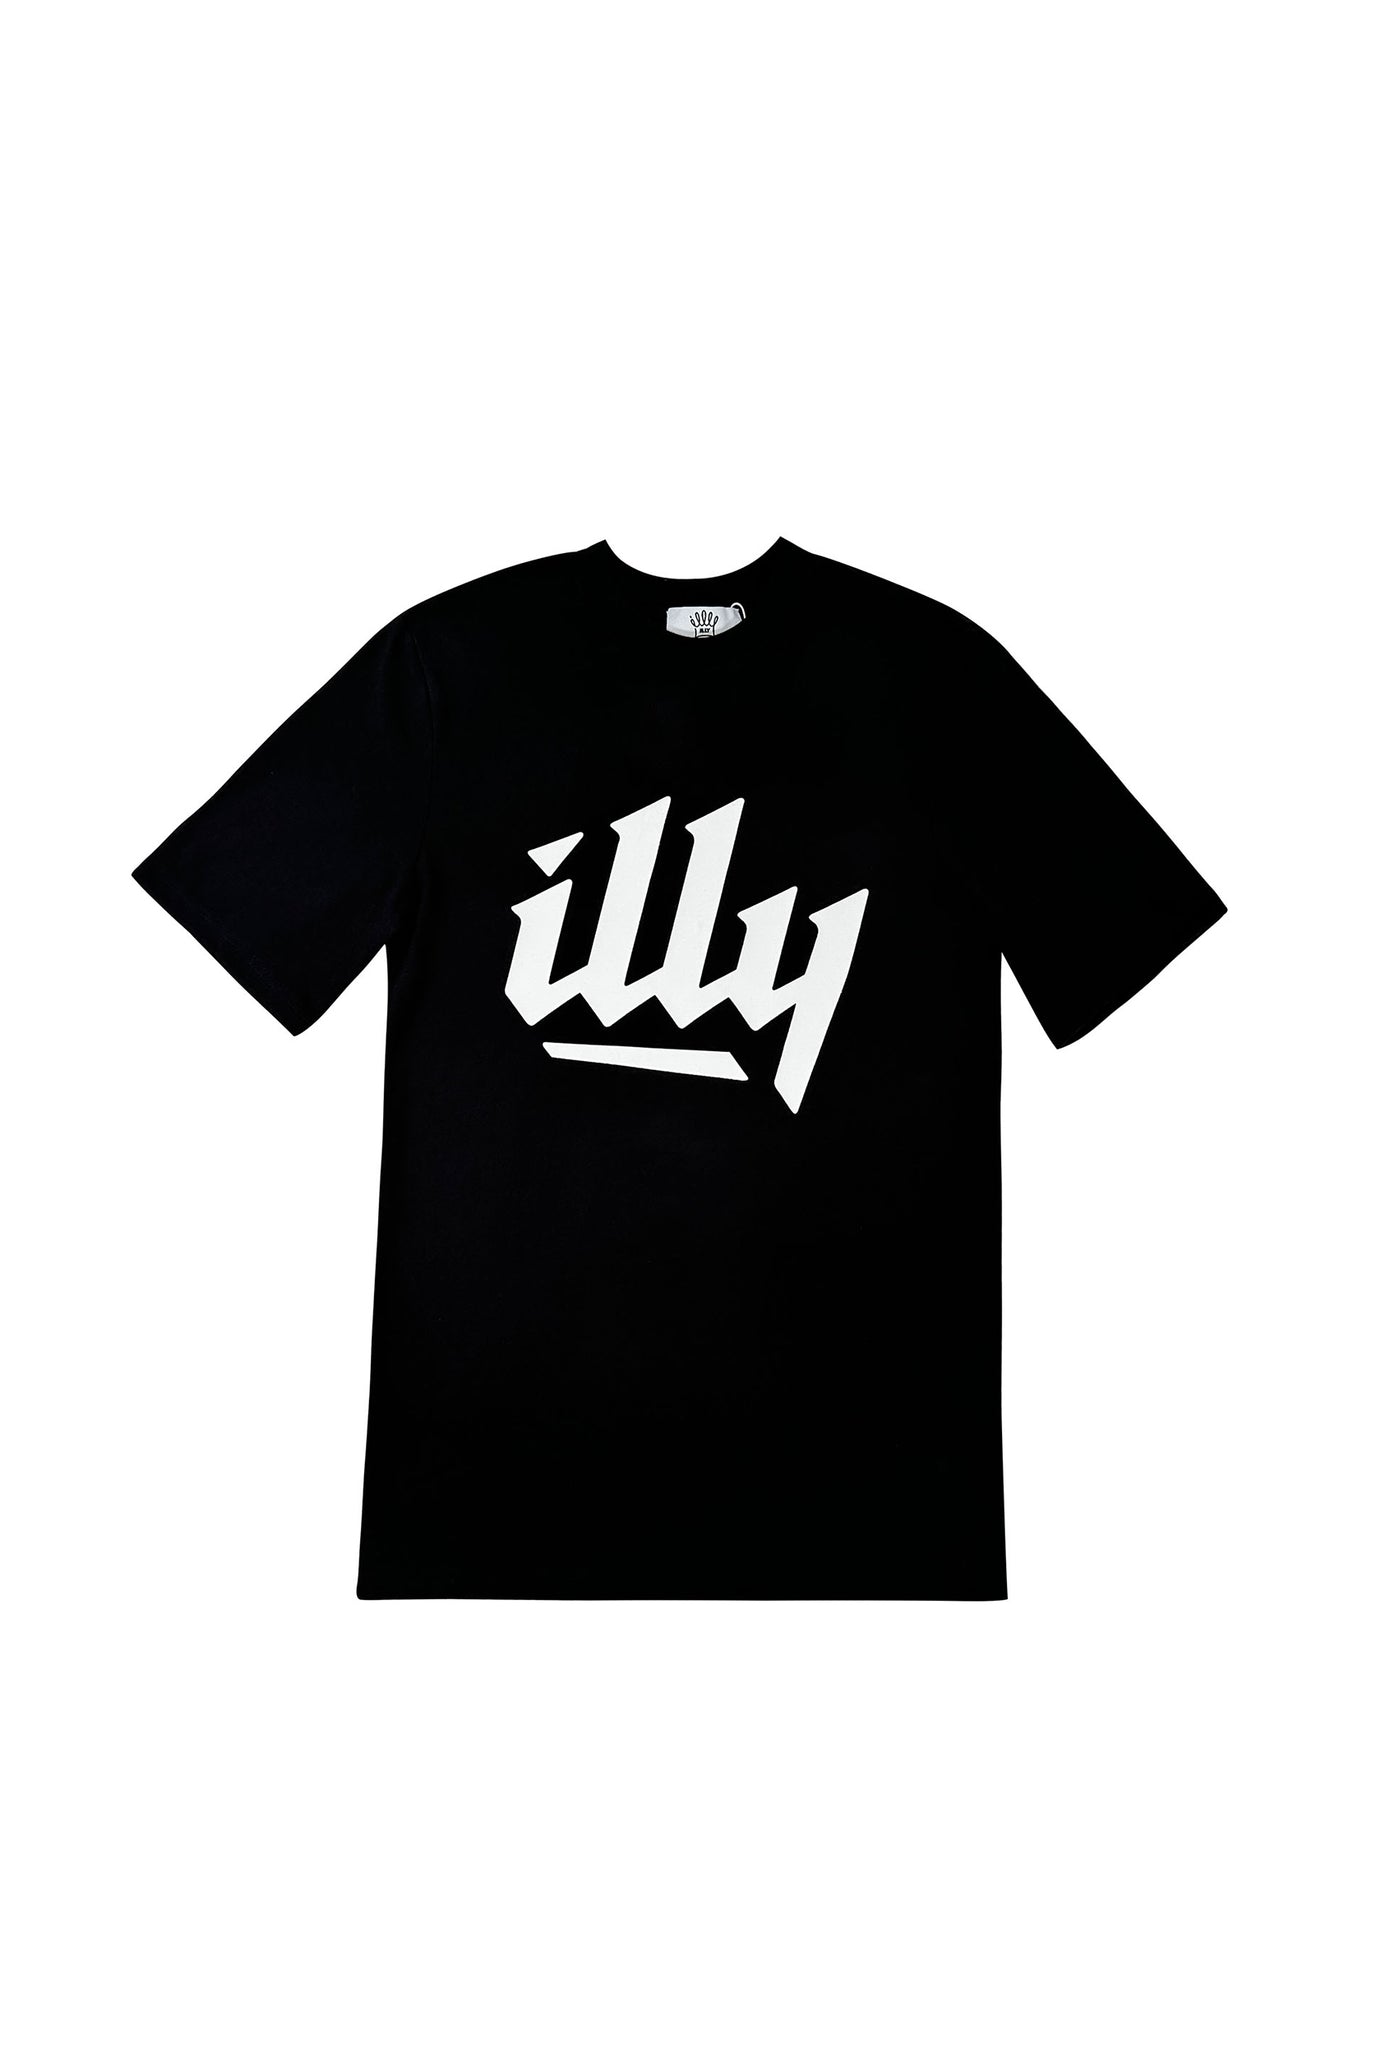 ILLY TEE IN BLACK